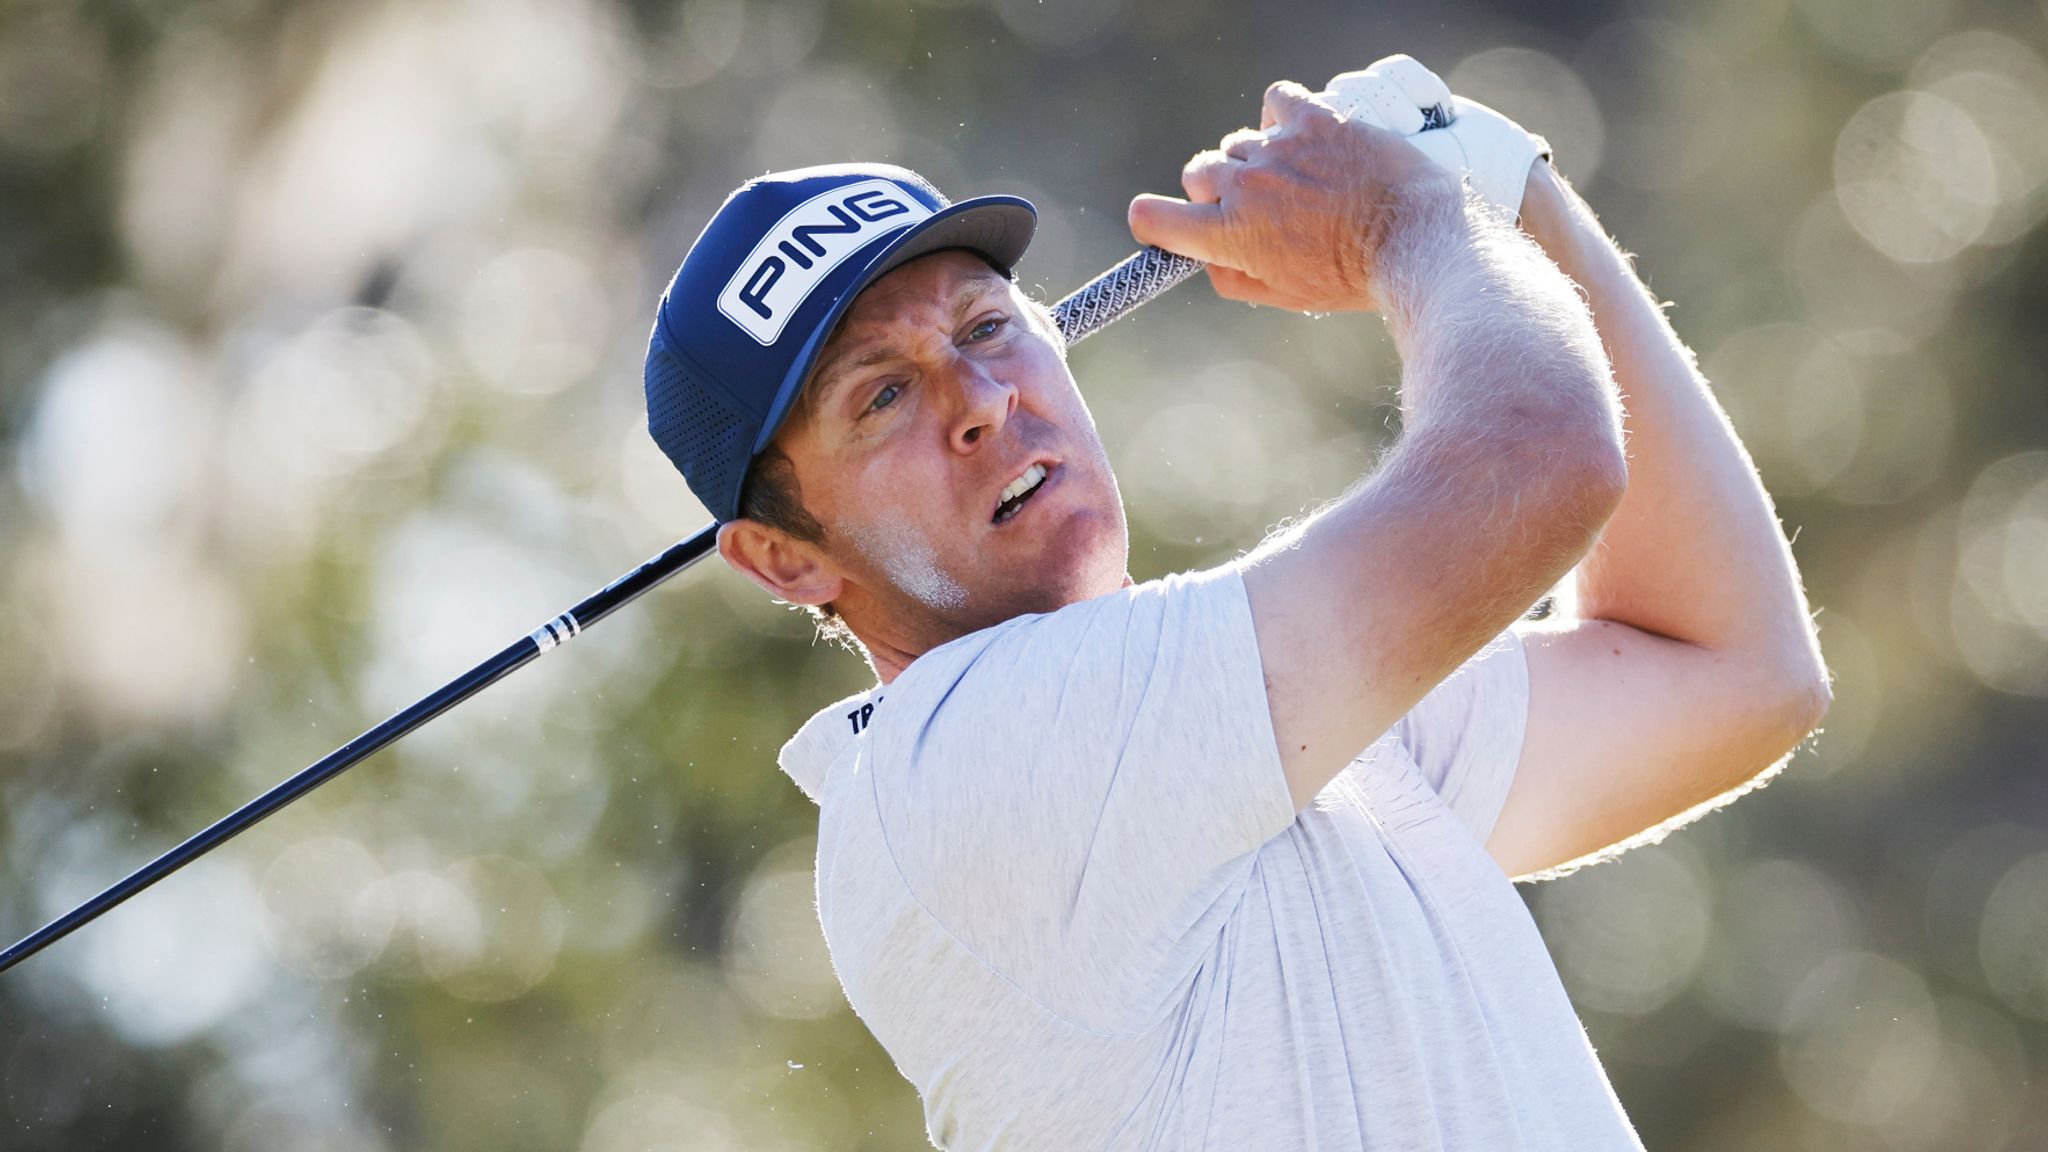 Bermuda Championship Ben Crane takes single-shot lead after his lowest PGA Tour score in 10 years Golf News Sky Sports